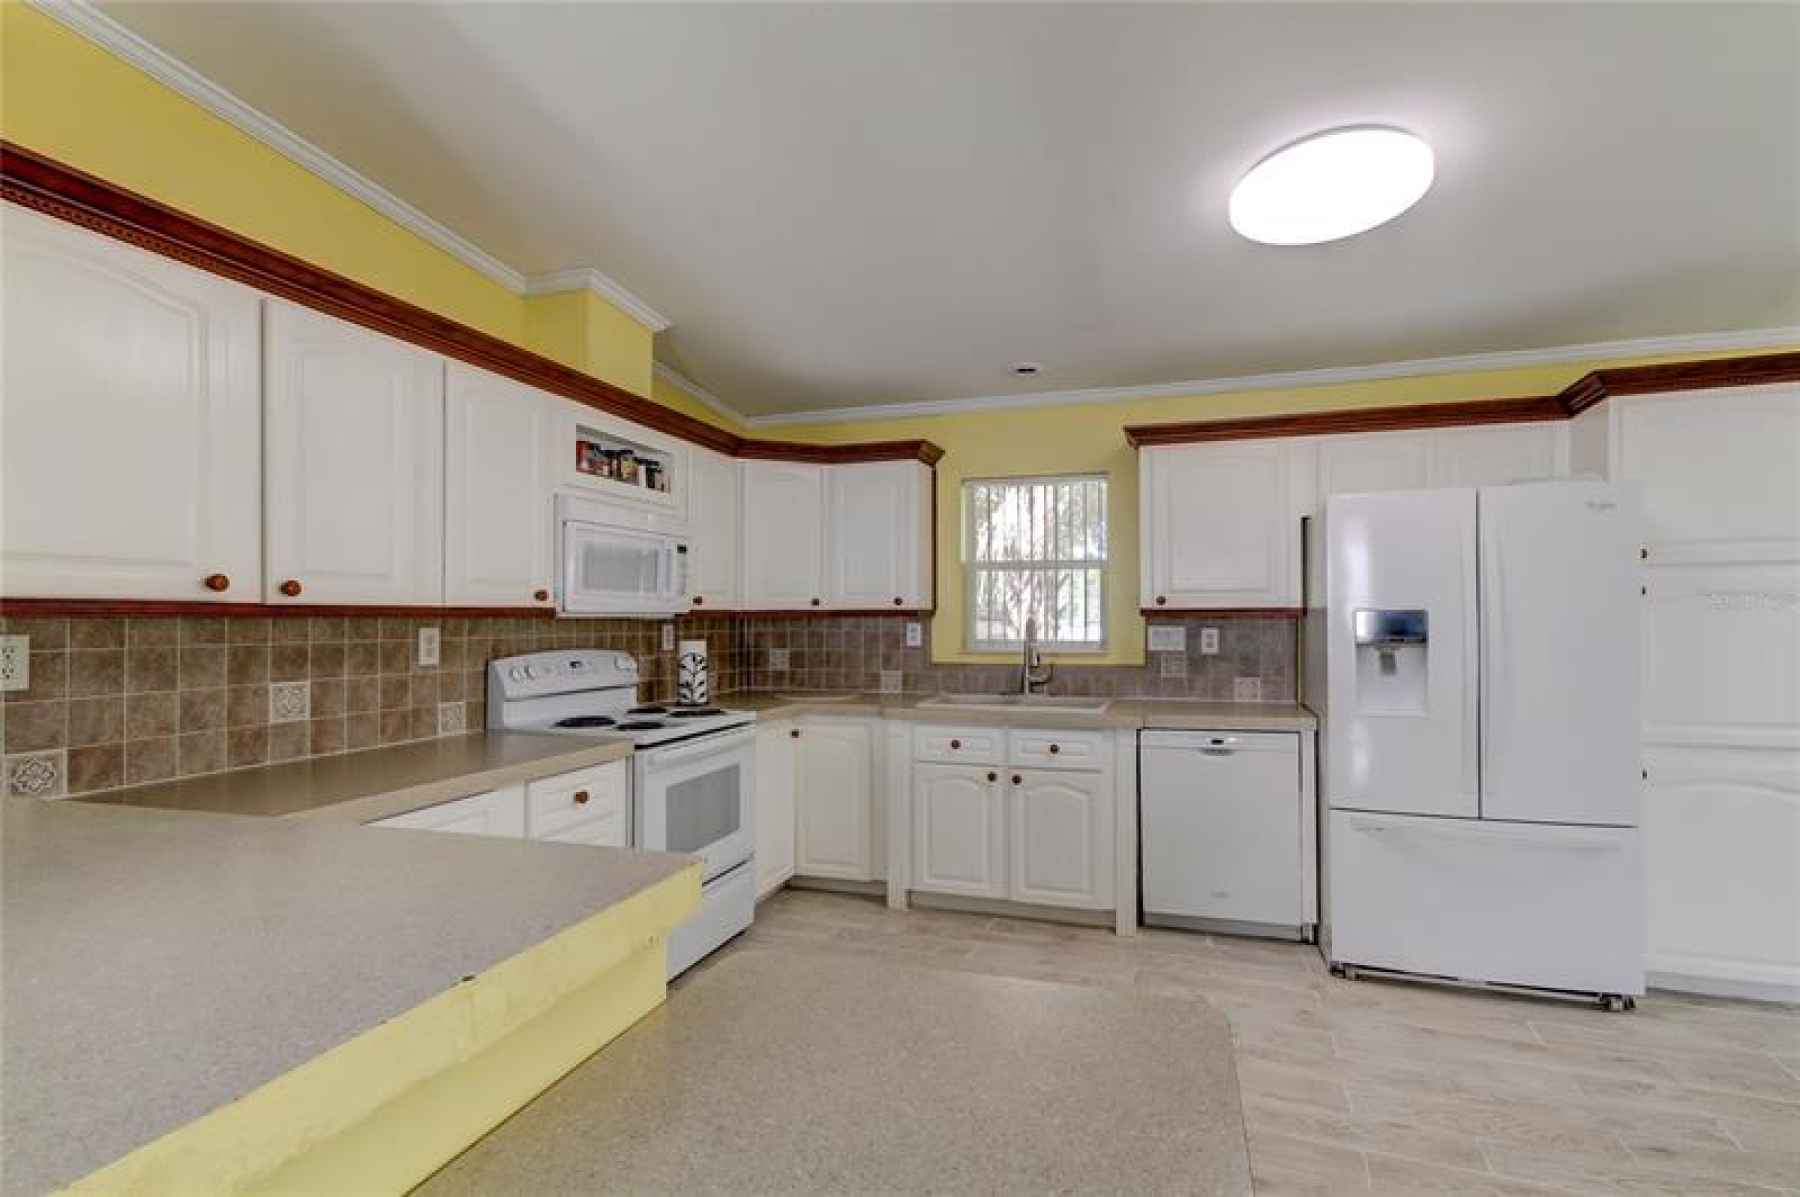 THE CHEF OF THE HOUSEHOLD WILL LOVE THIS SPACIOUS KITCHEN!